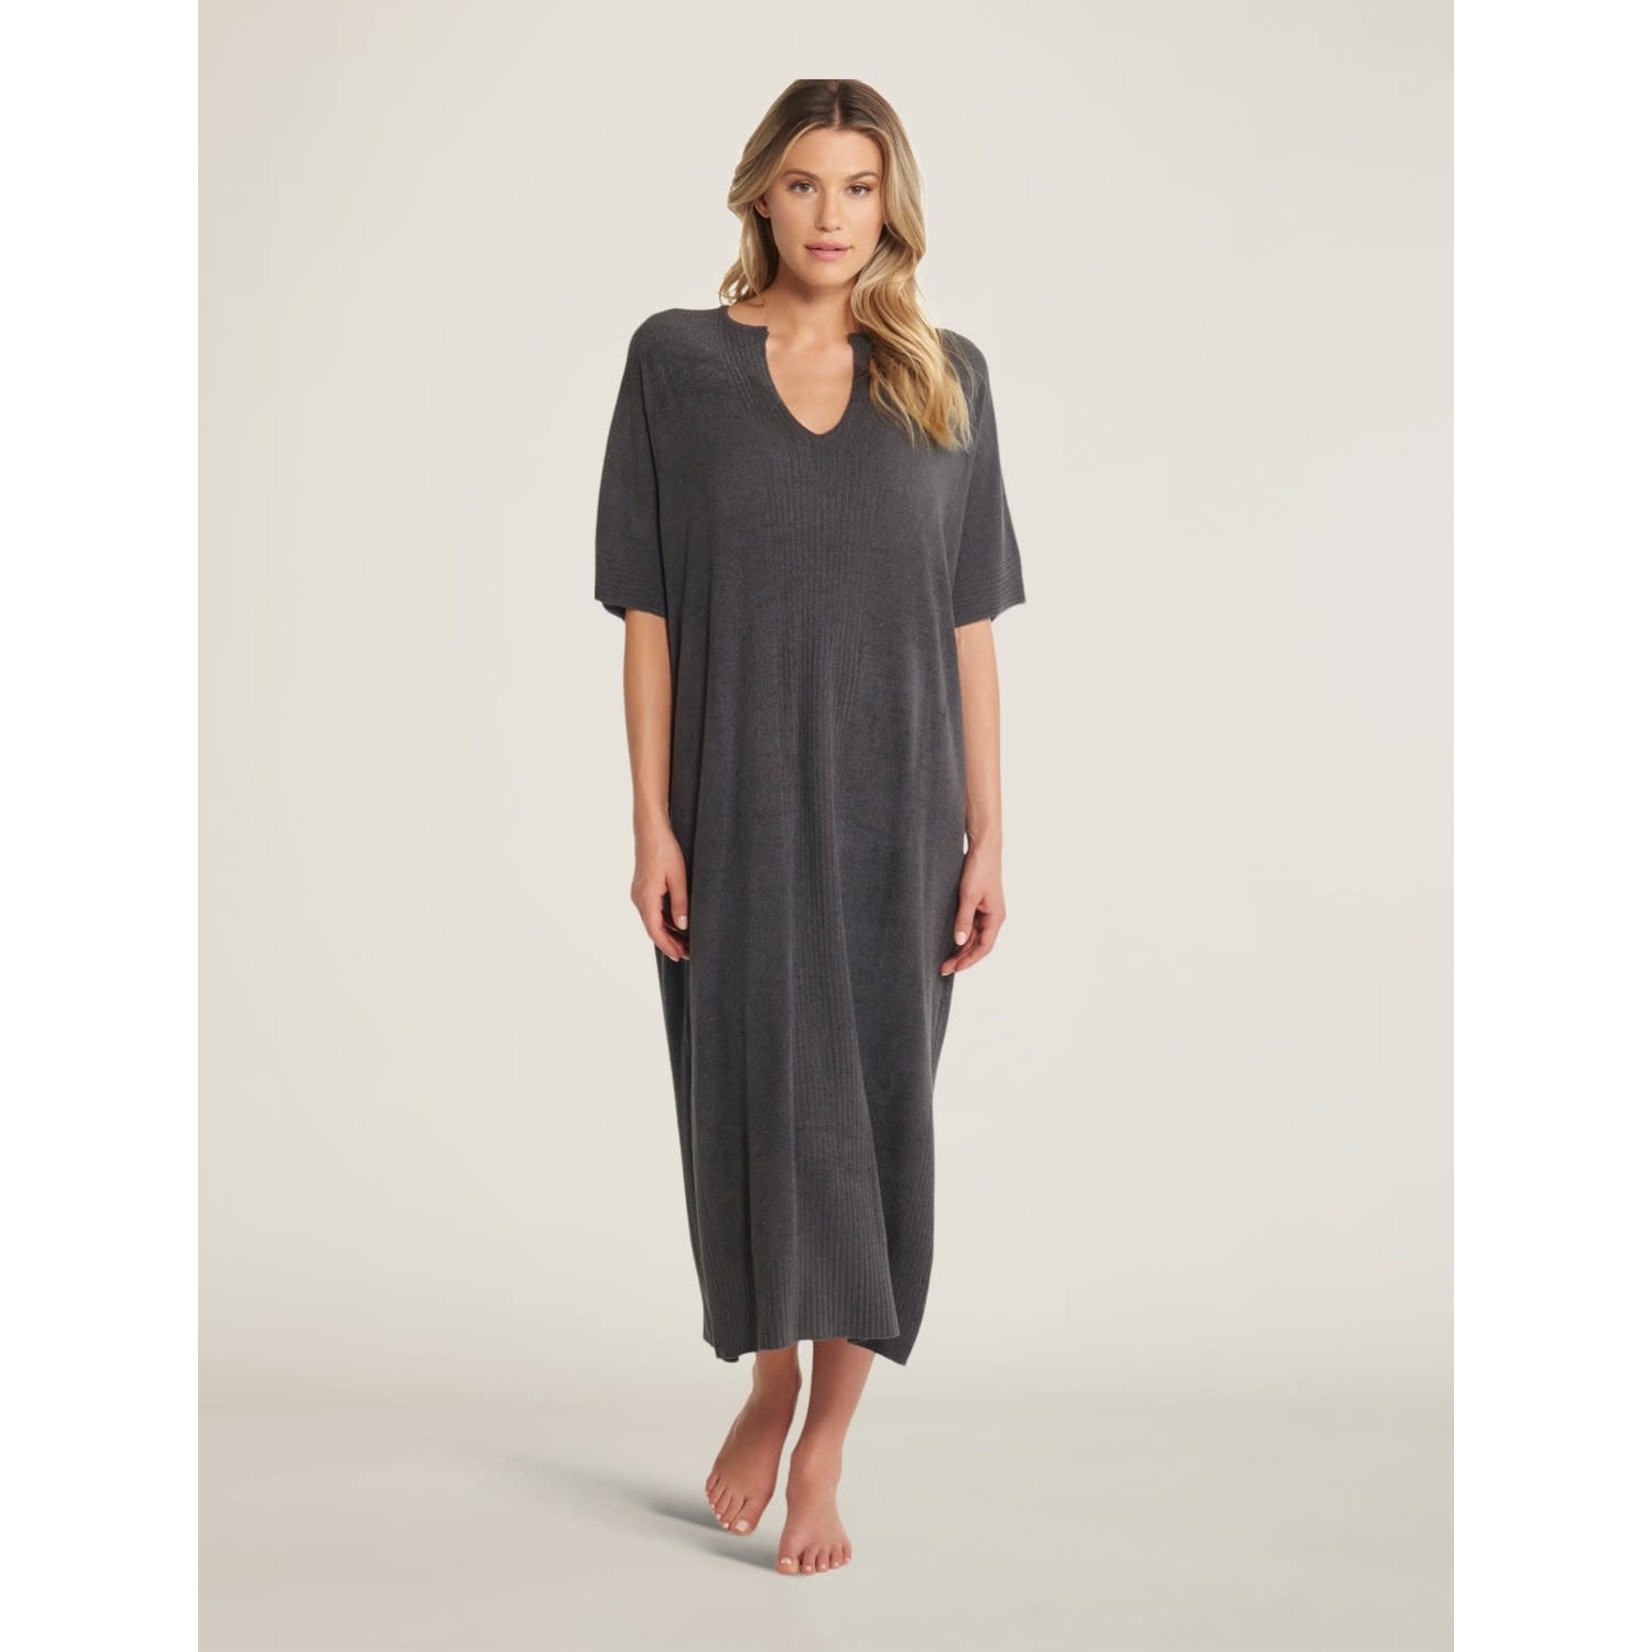 Barefoot Dreams CozyChic Ultra Lite Caftan in Carbon OS